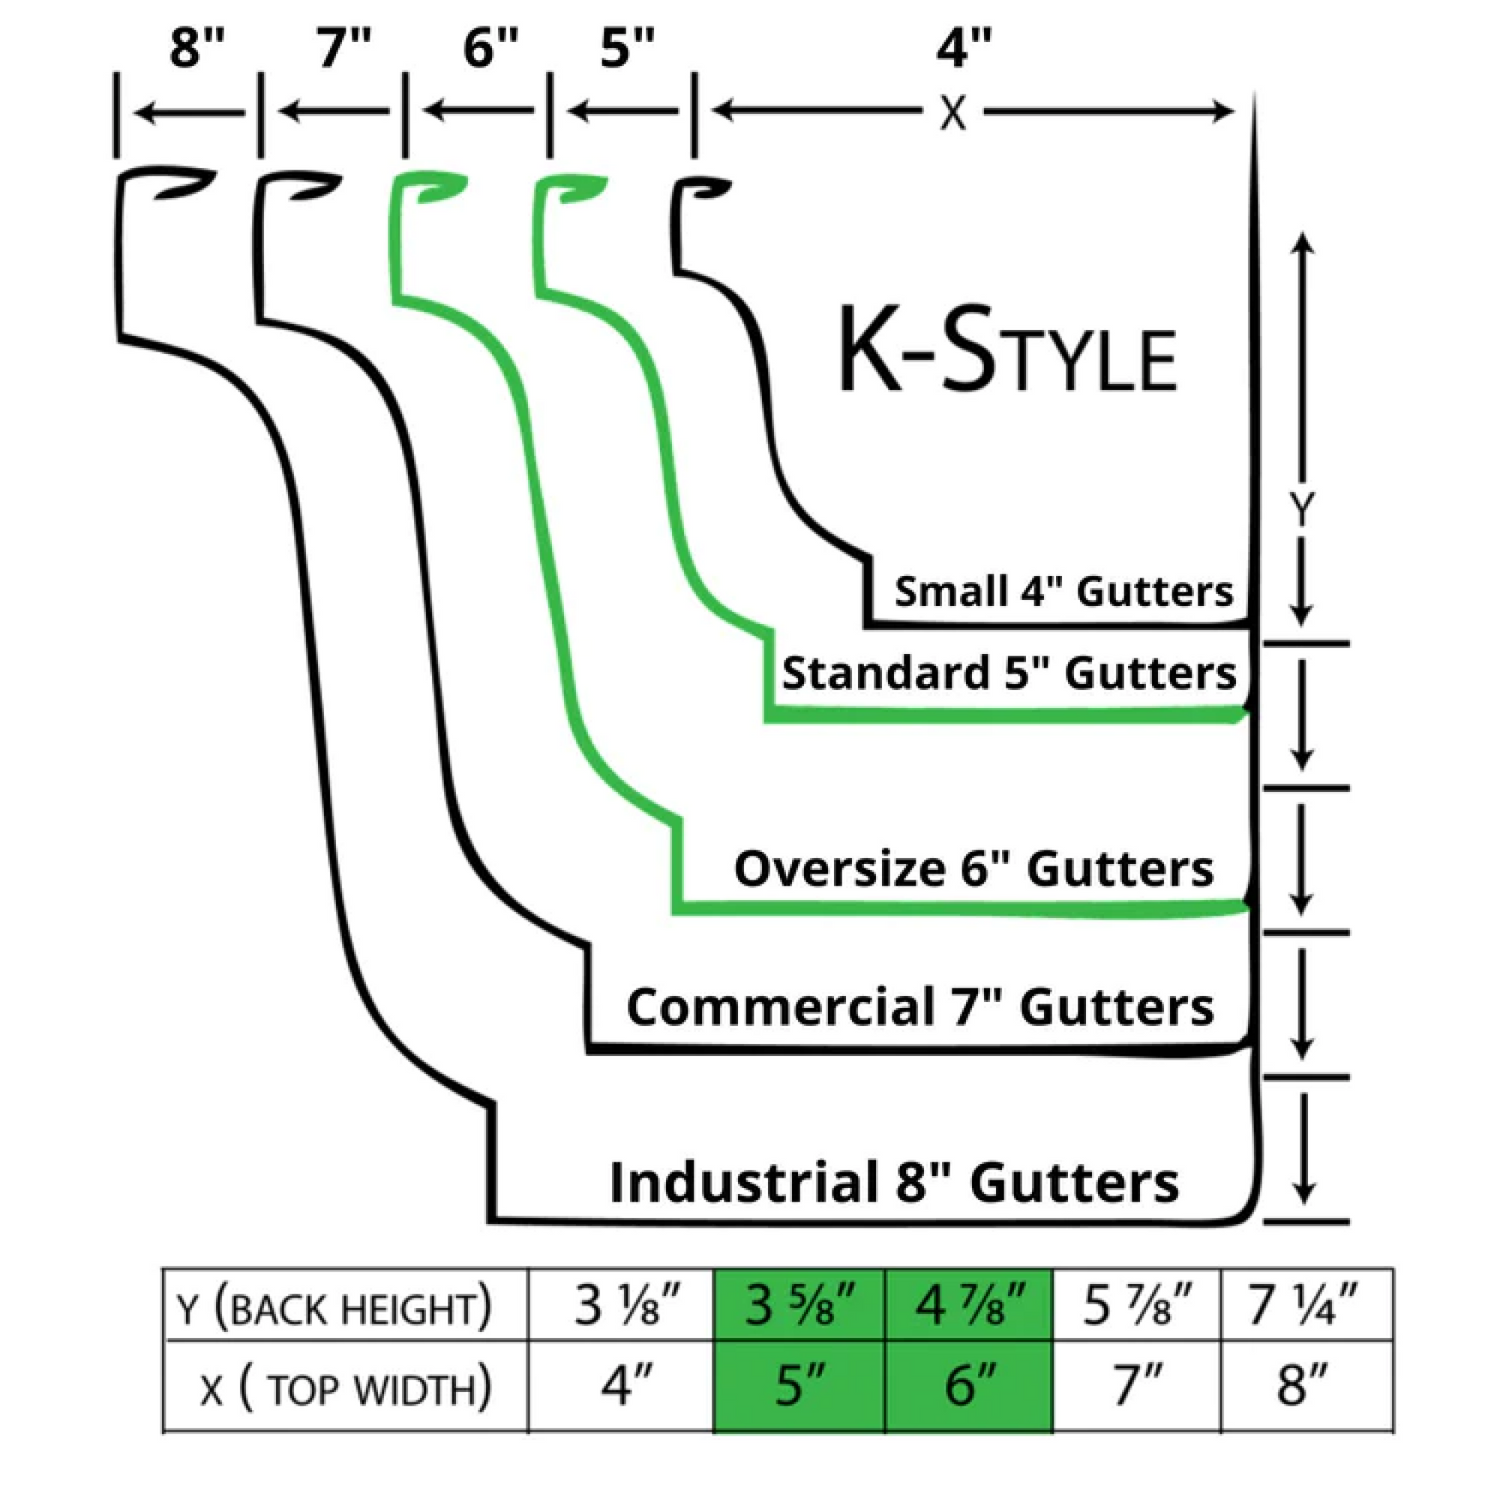 Residential and commercial gutter sizes